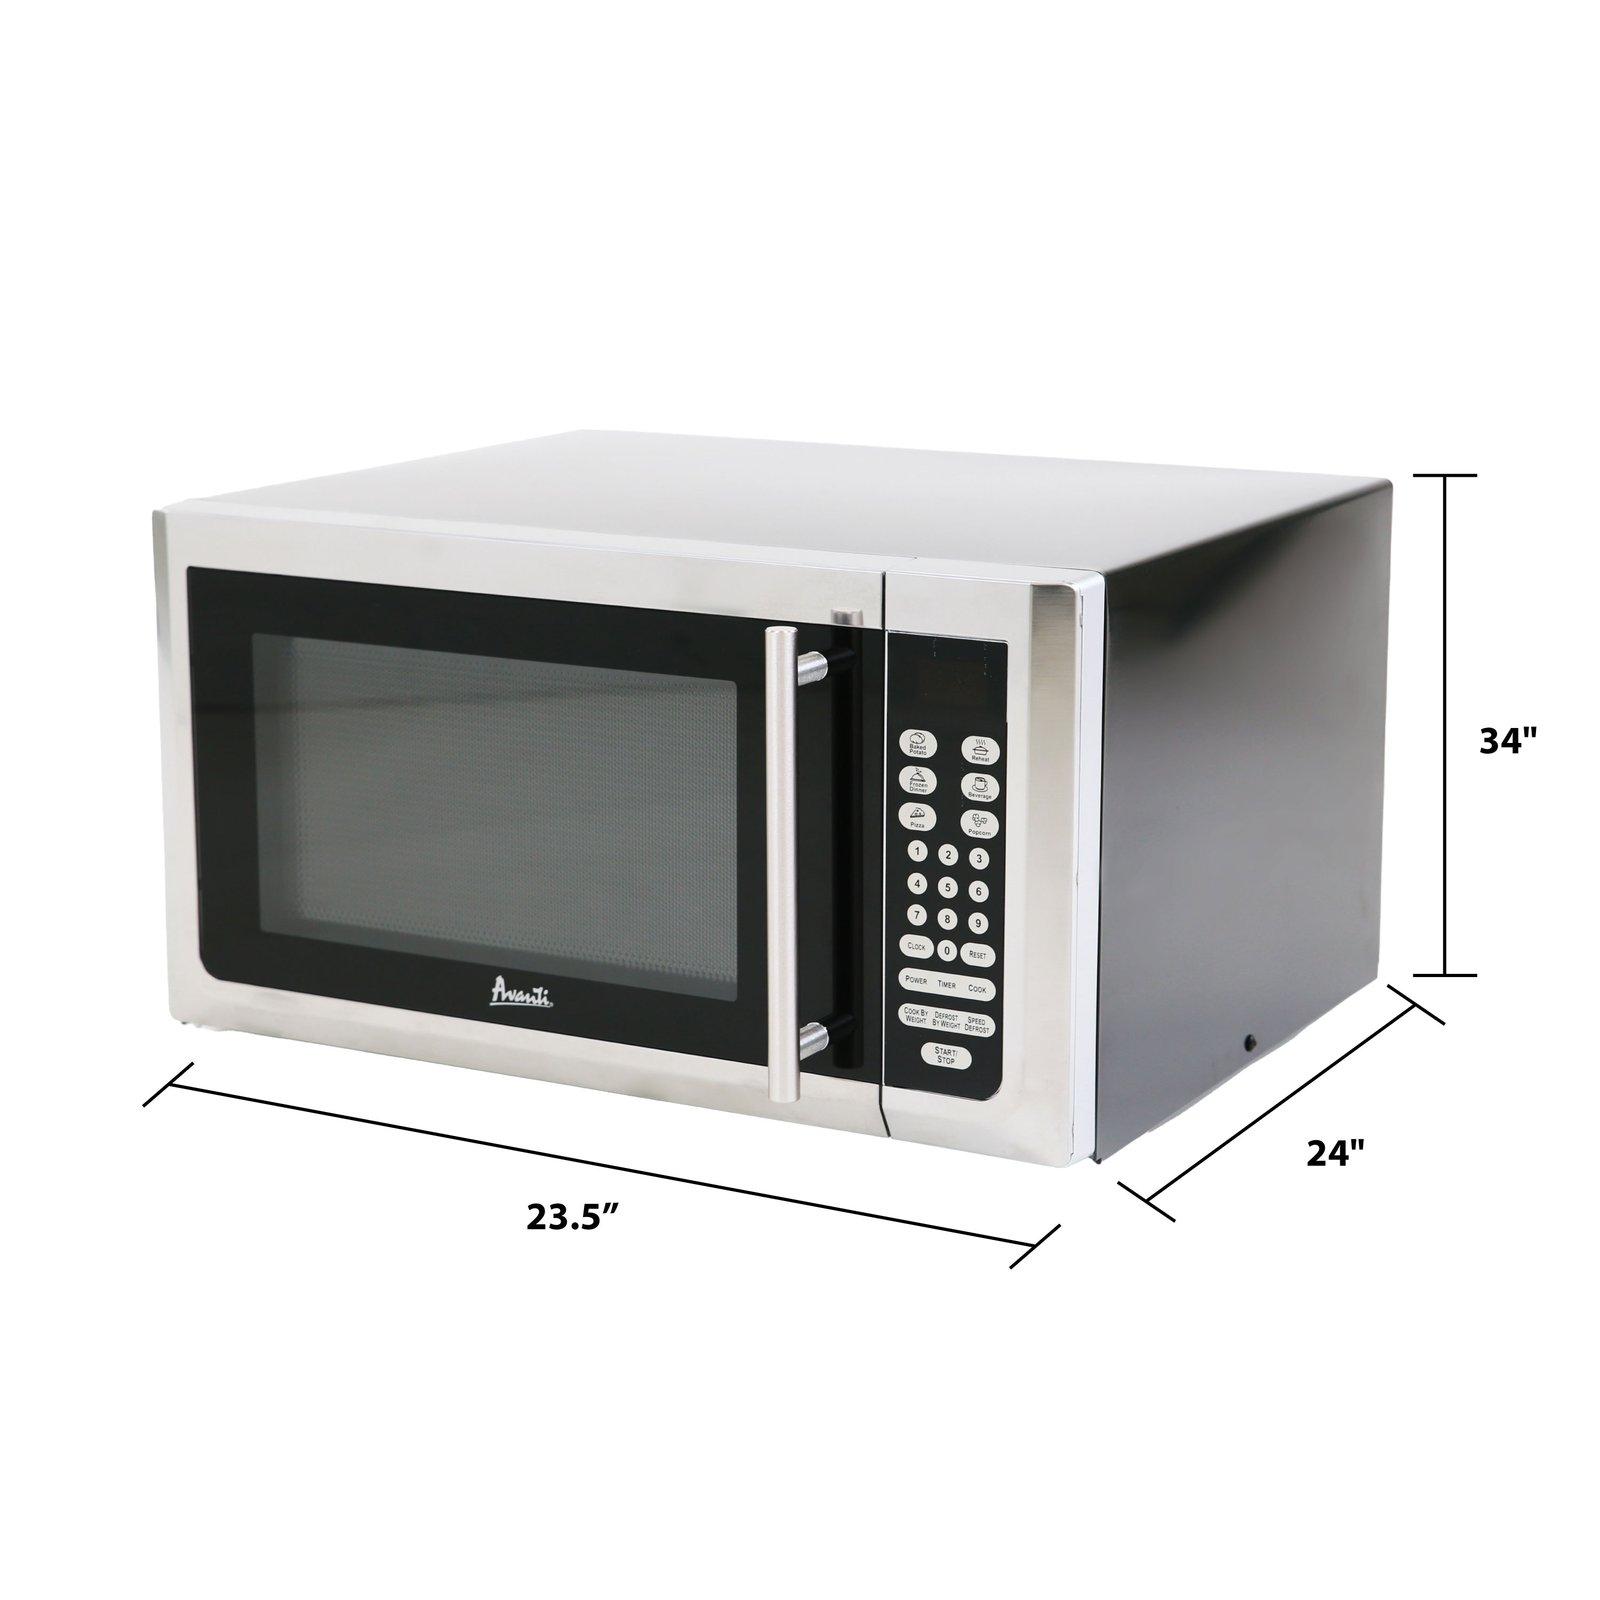 Avanti 1.6 cu. ft. Microwave Oven - Stainless Steel with Black Cabinet / 1.6 cu. ft.